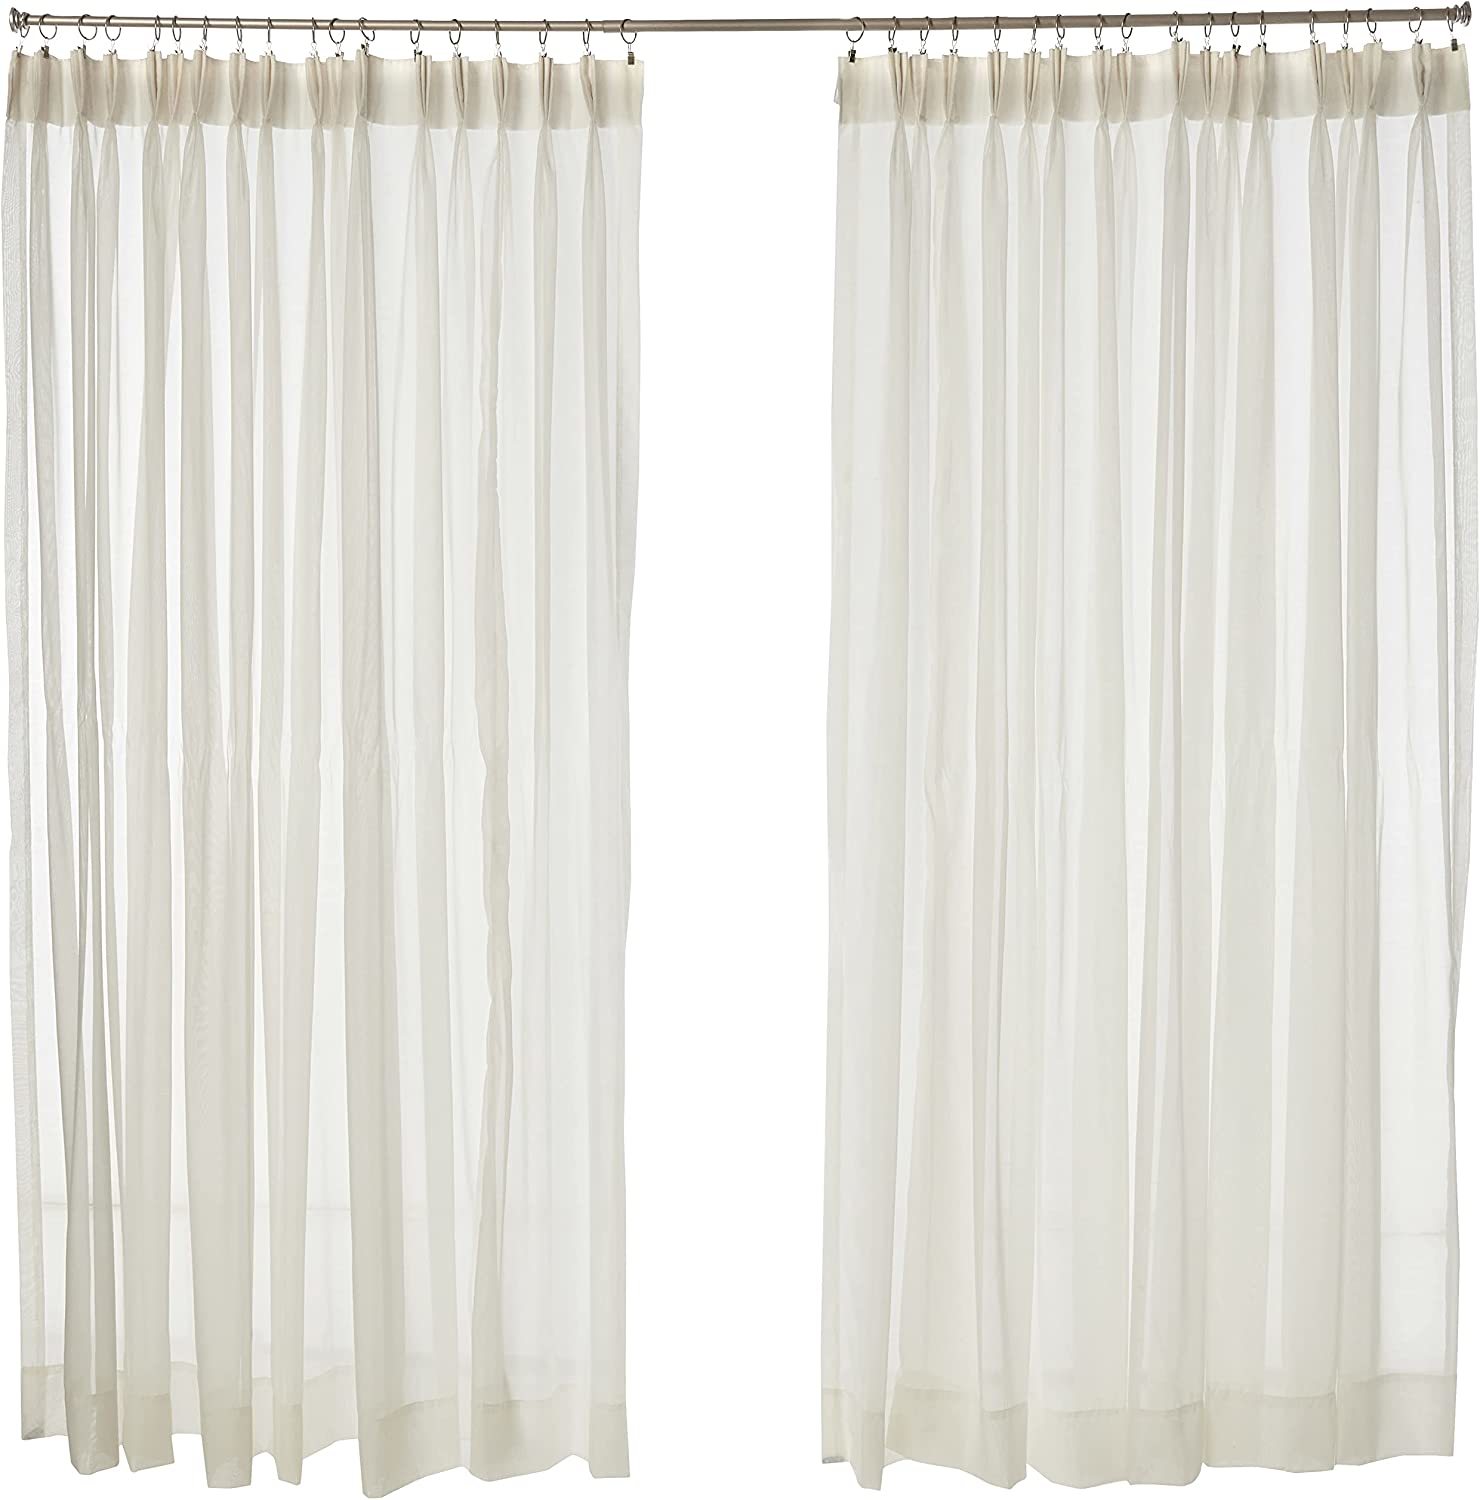 Stylemaster Splendor Pinch Pleated Drapes Pair, 2 Of 60" By 84", Beige. - $62.93